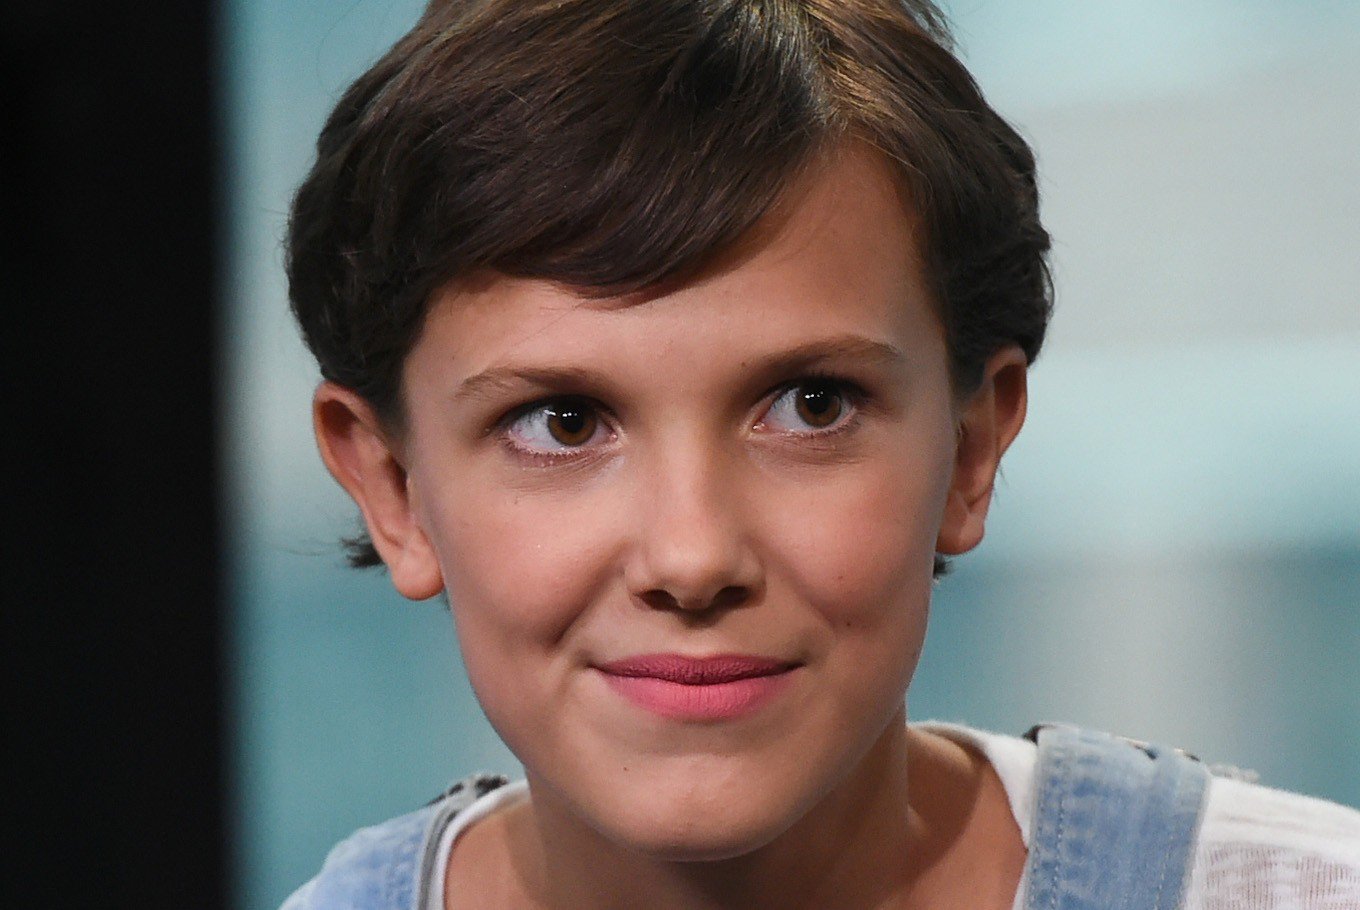 Milliebobbybrown On Topsy One